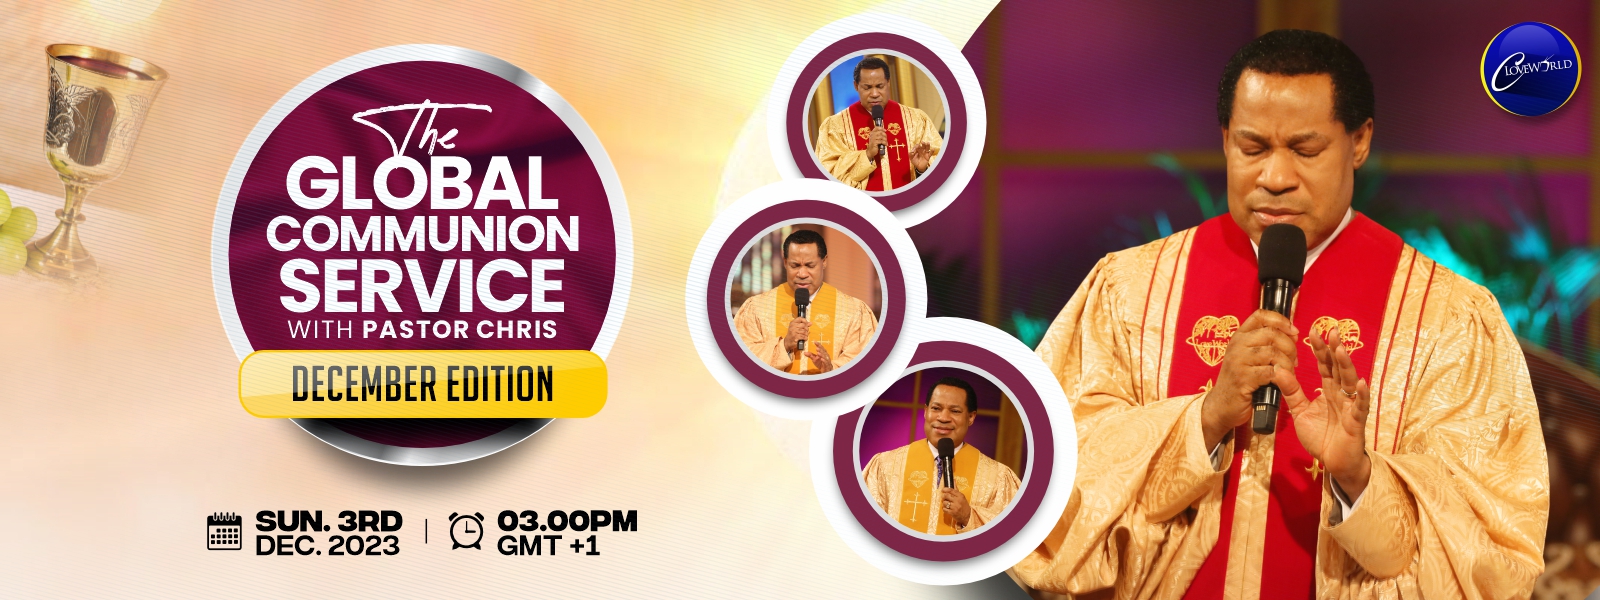 GLOBAL COMMUNION SERVICE WITH PASTOR CHRIS DECEMBER EDITION